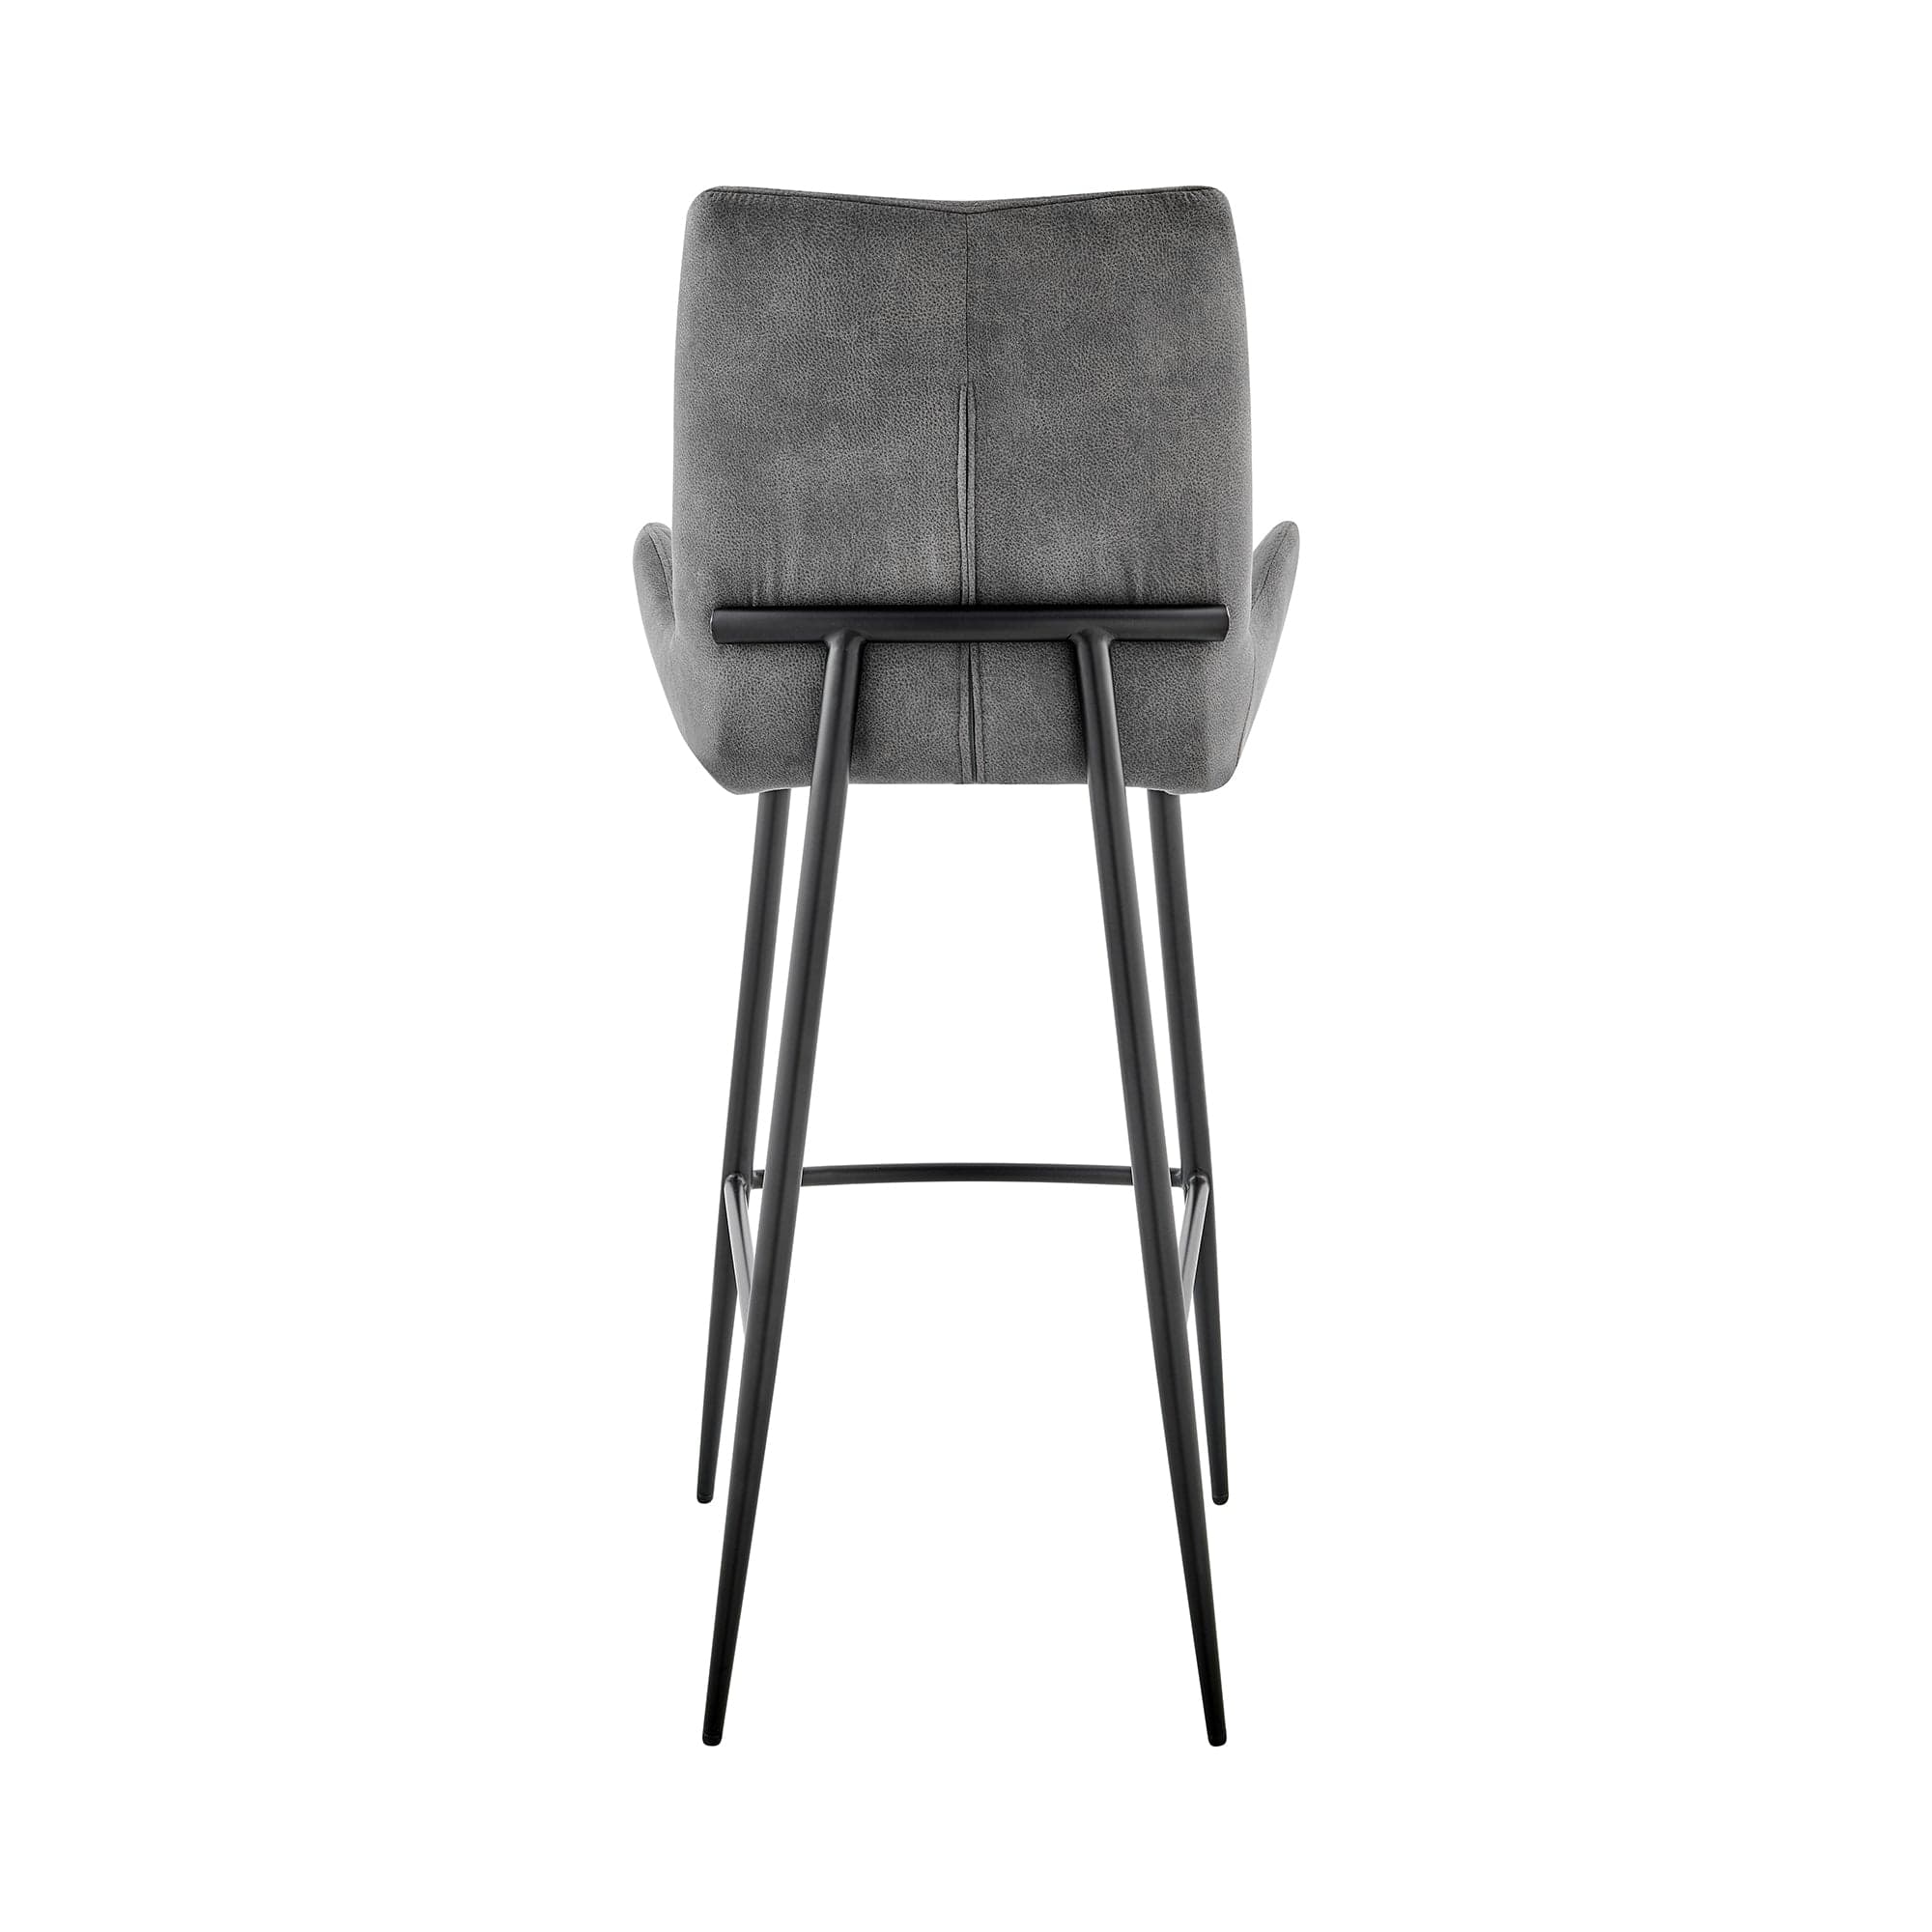 Armen Living Barstool Armen Living - Panama 26" Counter Height Bar Stool in Charcoal Fabric and Black Finish | LCPMBACH26